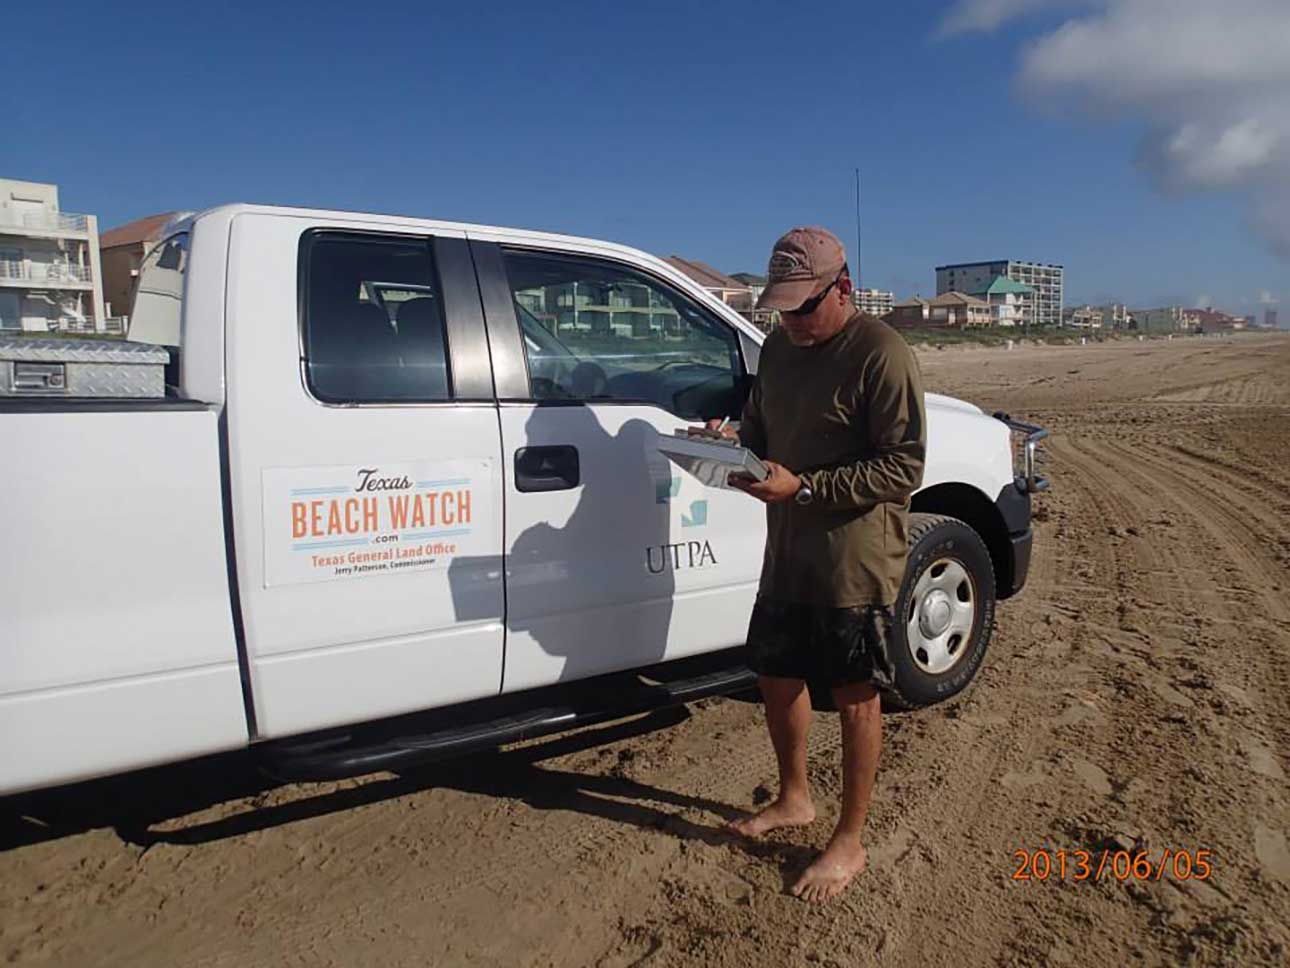 A man standing next to a pick up truck on the beach filling some papers